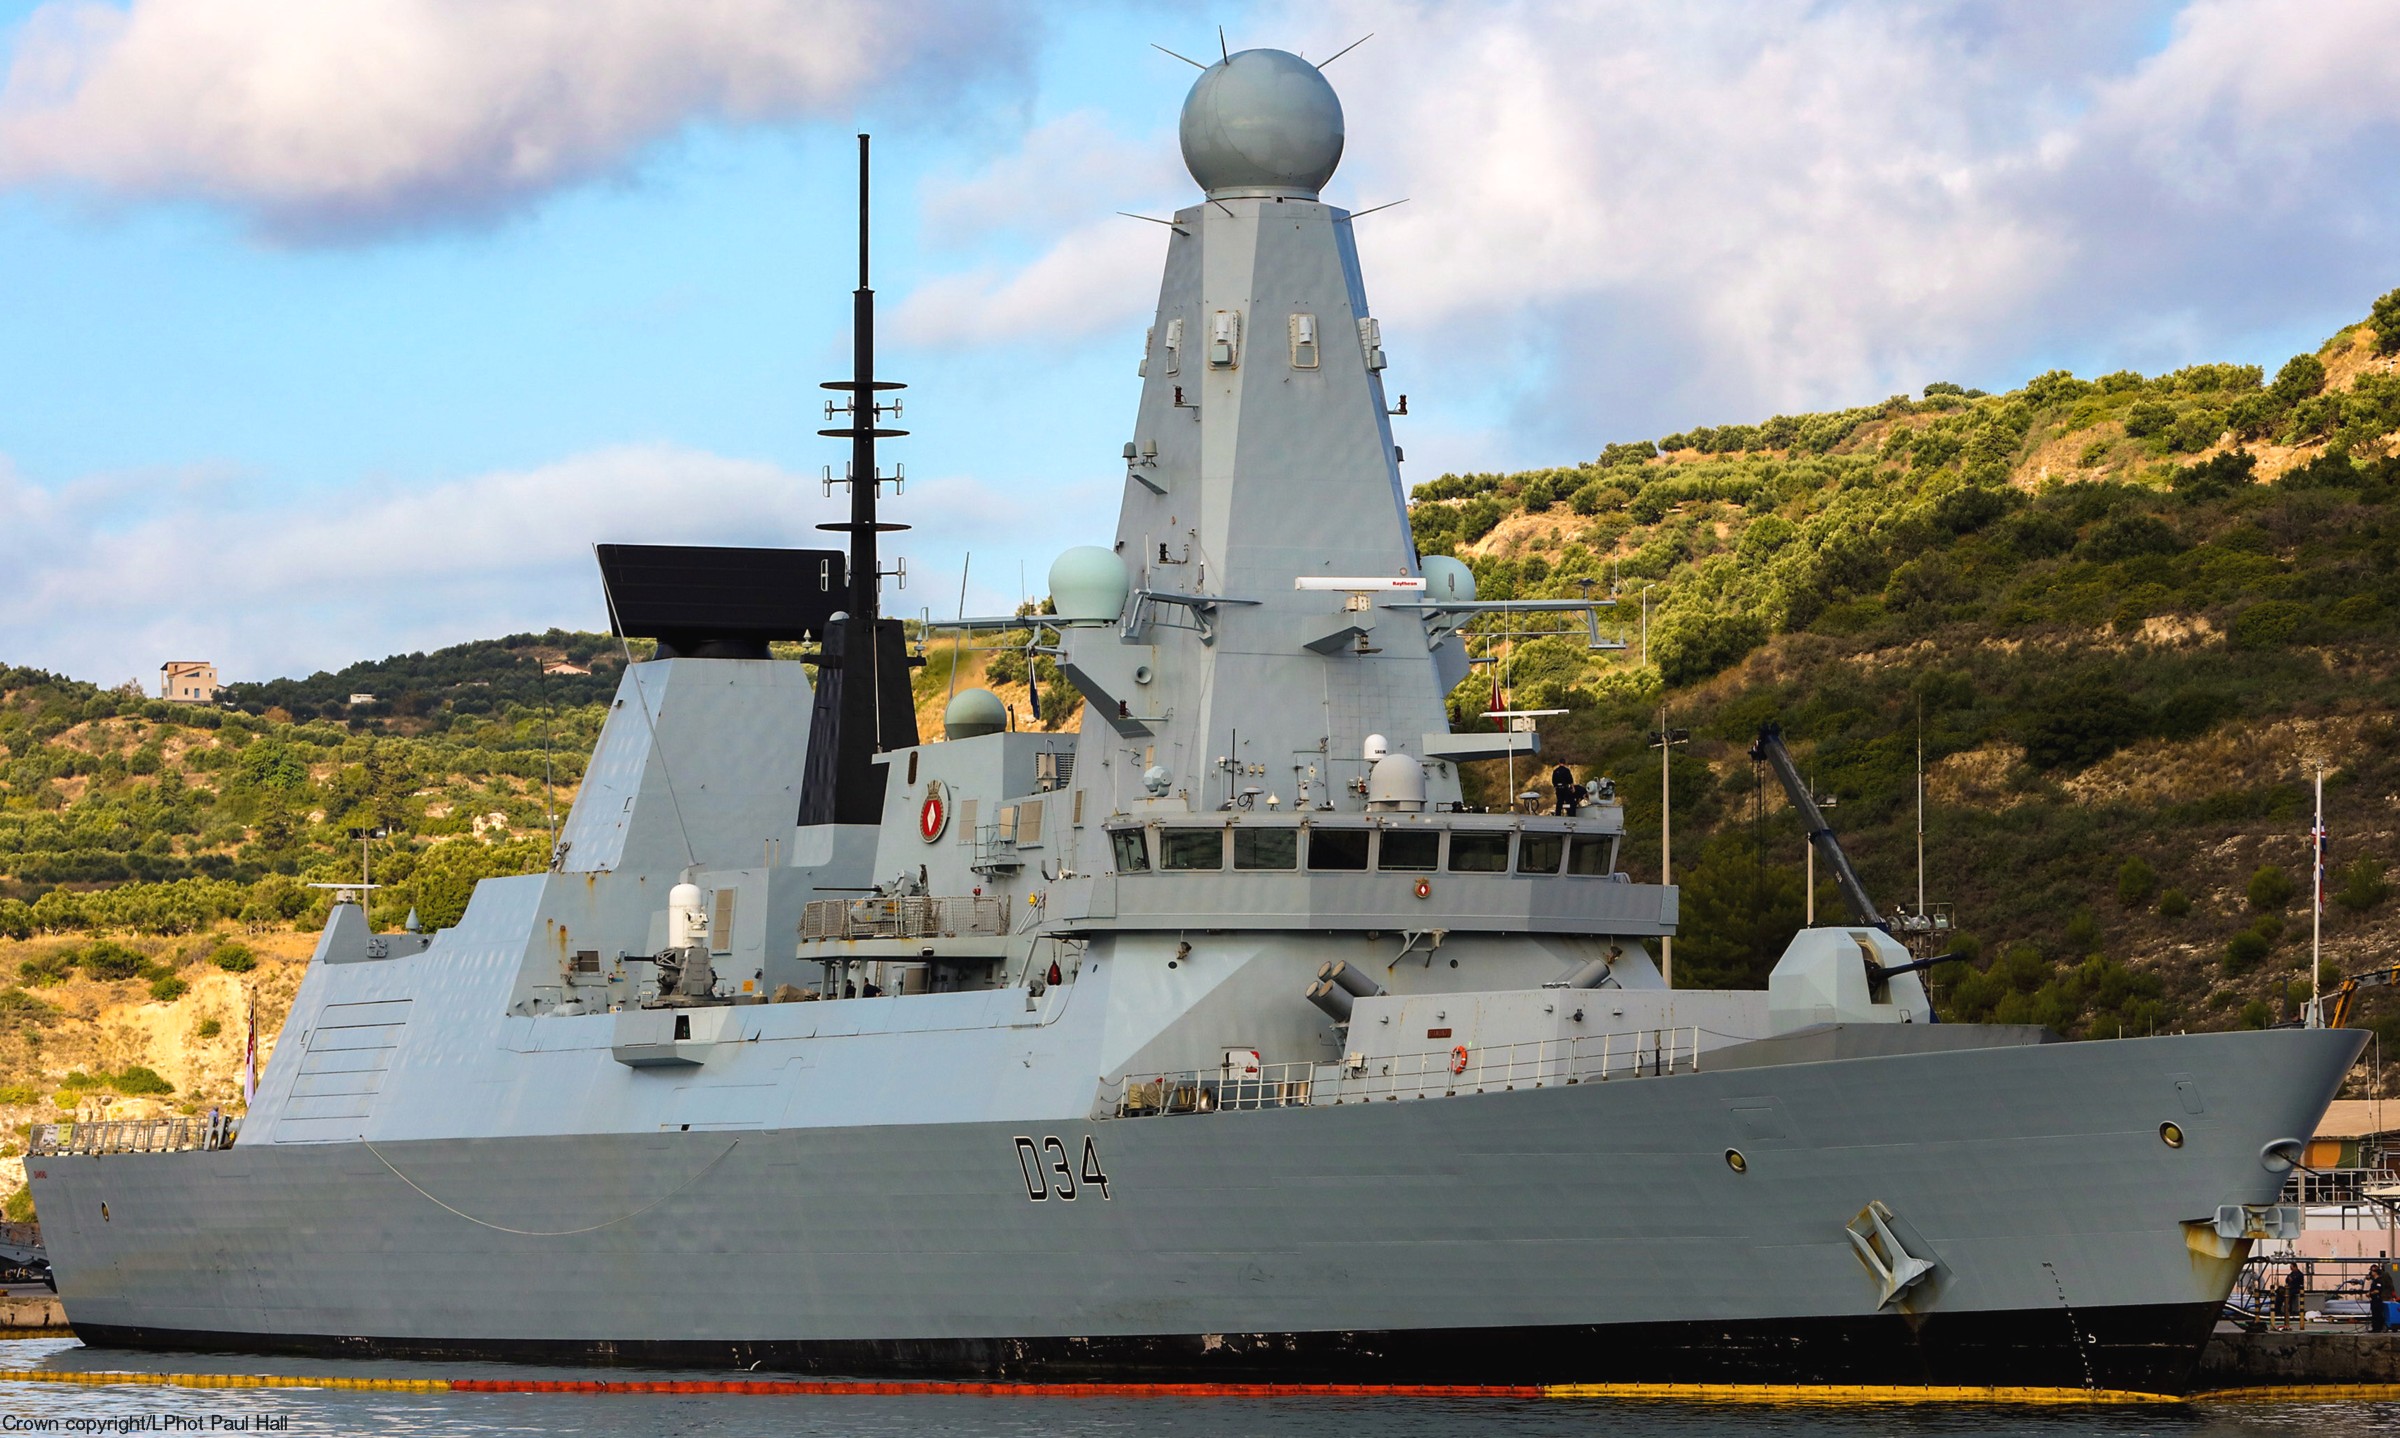 d34 hms diamond d-34 type 45 daring class guided missile destroyer ddg royal navy sea viper paams 50x bae systems ships